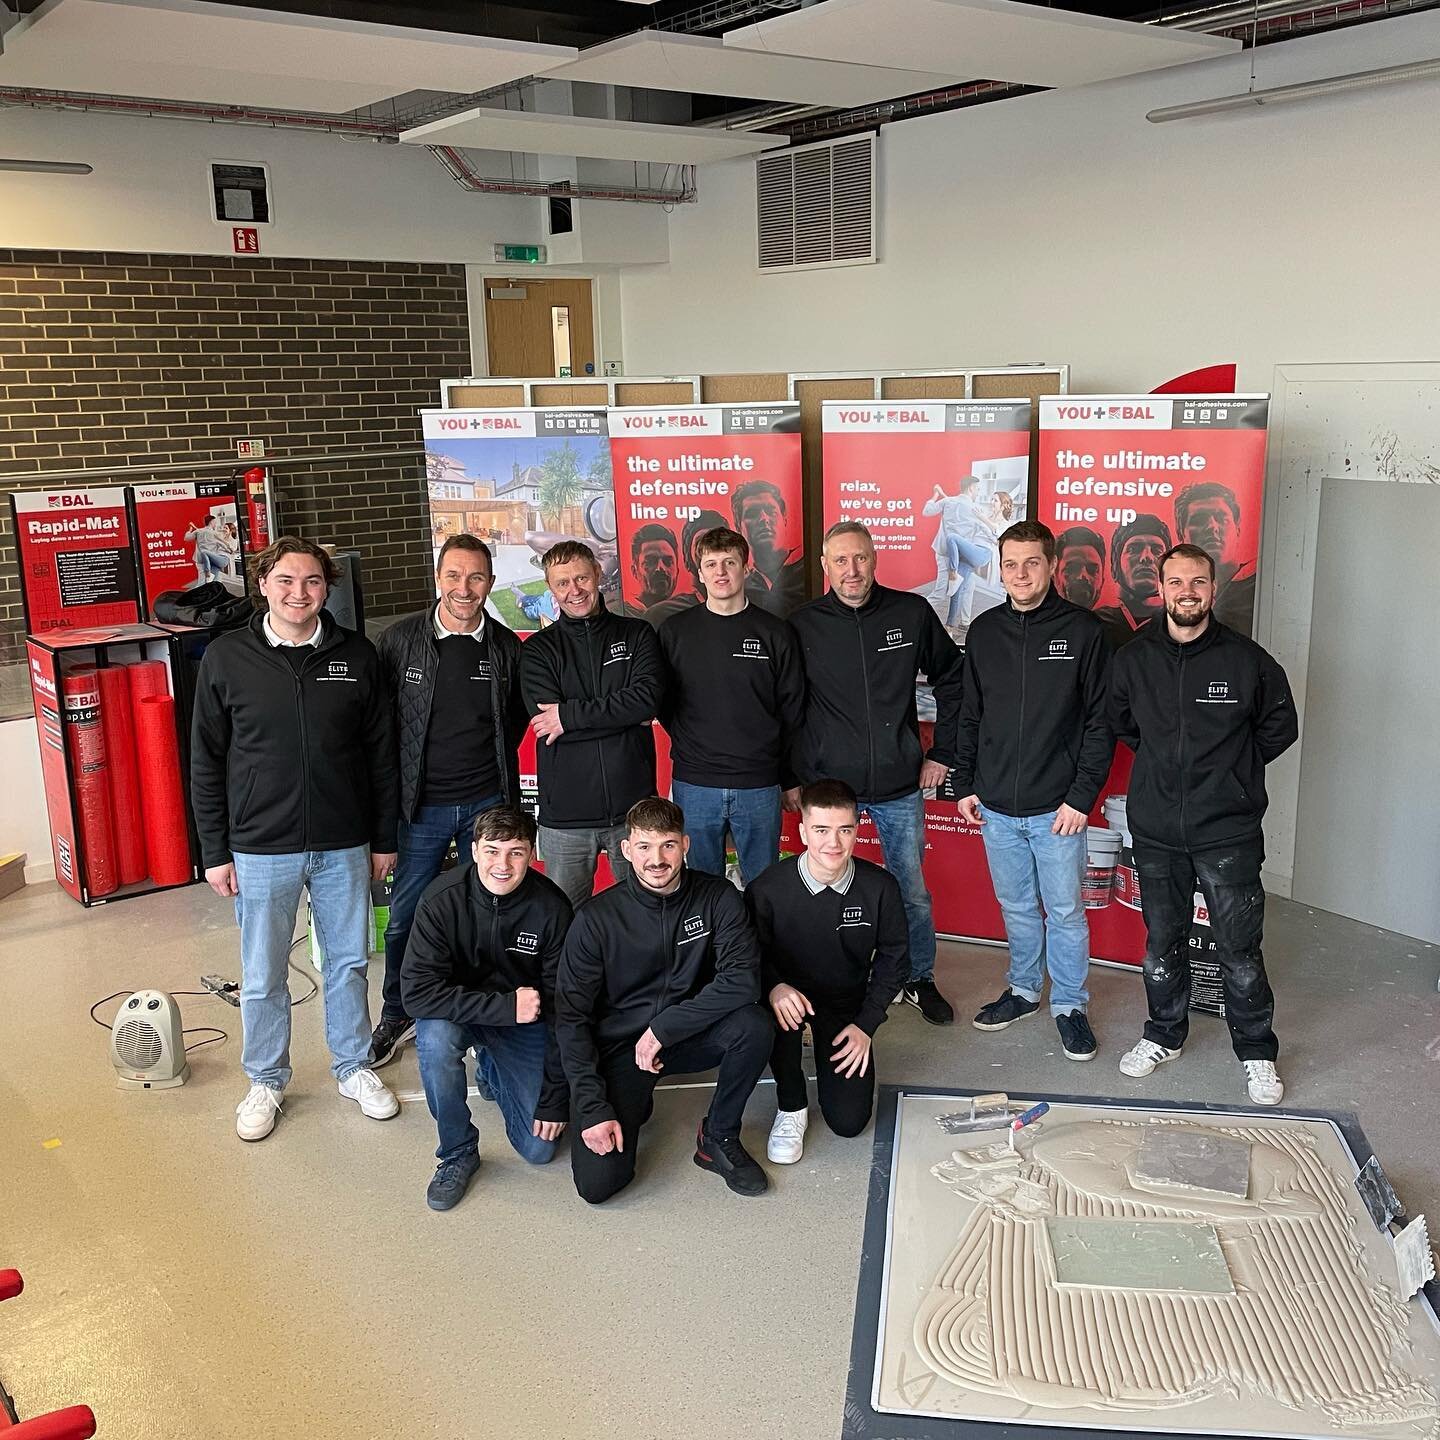 Our Bathroom Installations Team visited the fantastic @baltiling Innovation and Technology Centre today for a training day. 
It was a great opportunity to learn about all of their innovative new products. Thanks to David and Keiron for such an inform